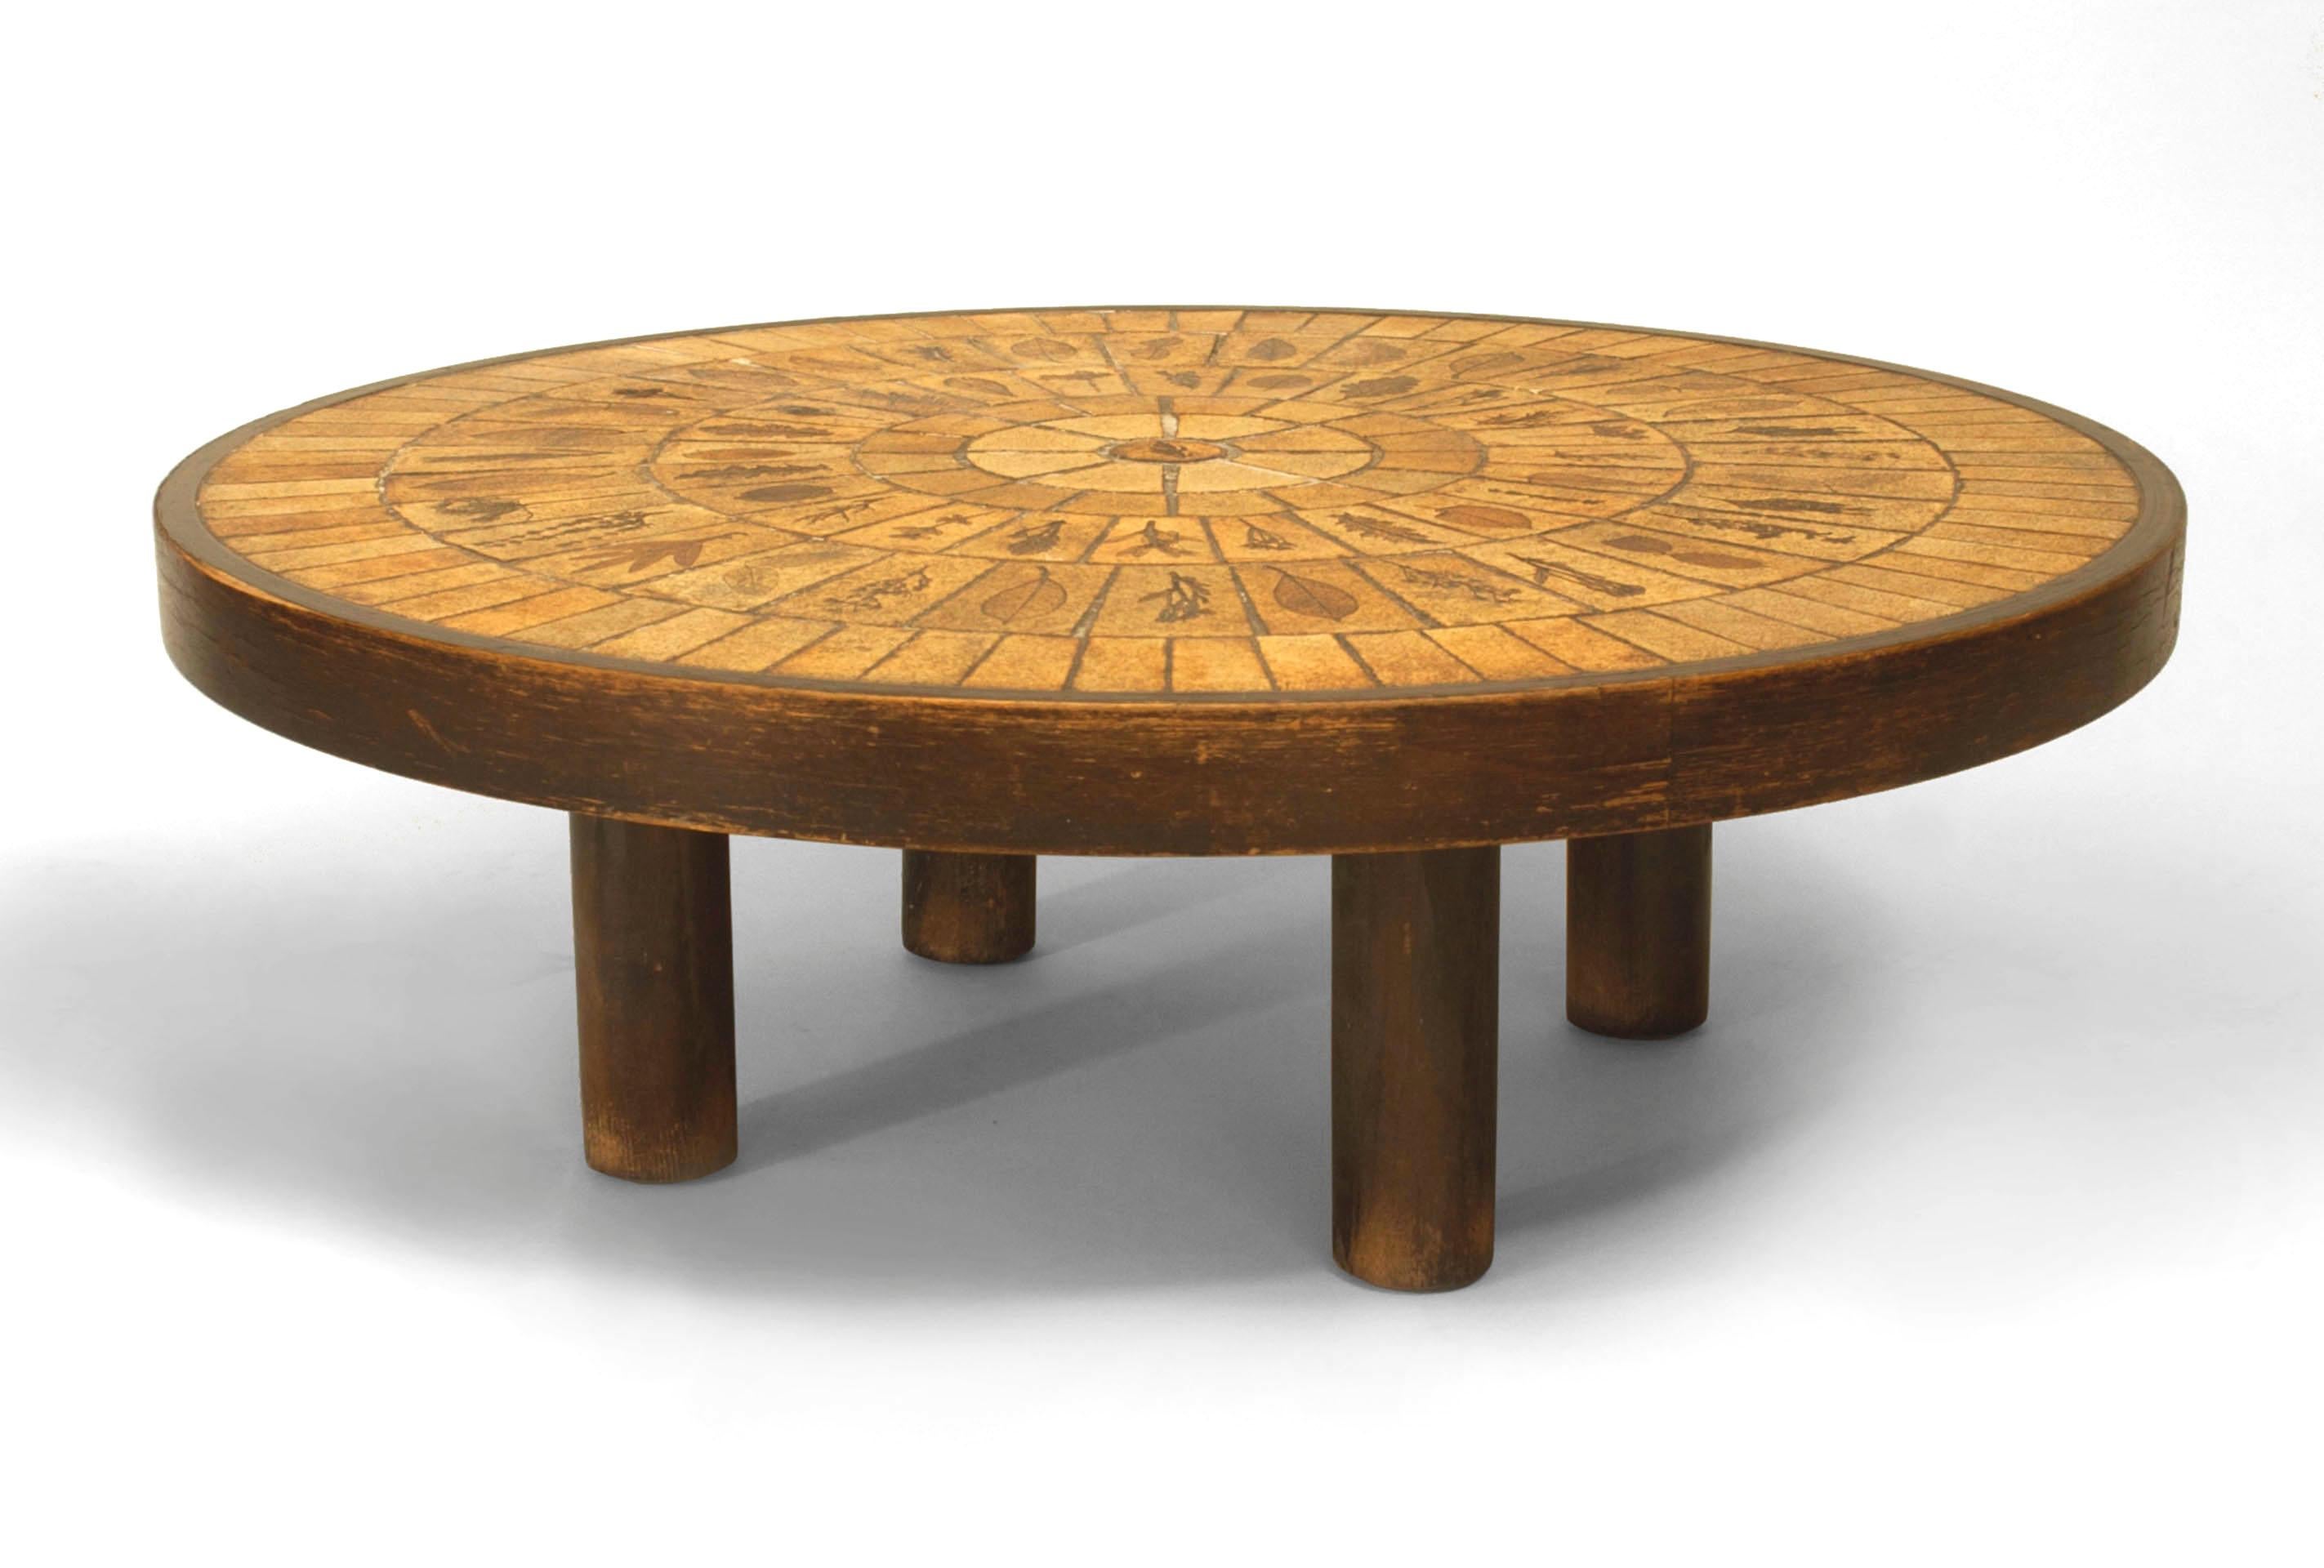 French Mid-Century (1960s) round coffee table with a round inset beige ceramic tile top with a sunburst design decorated with various leaves on a stained oak base. (signed: ROGER CAPRON)
